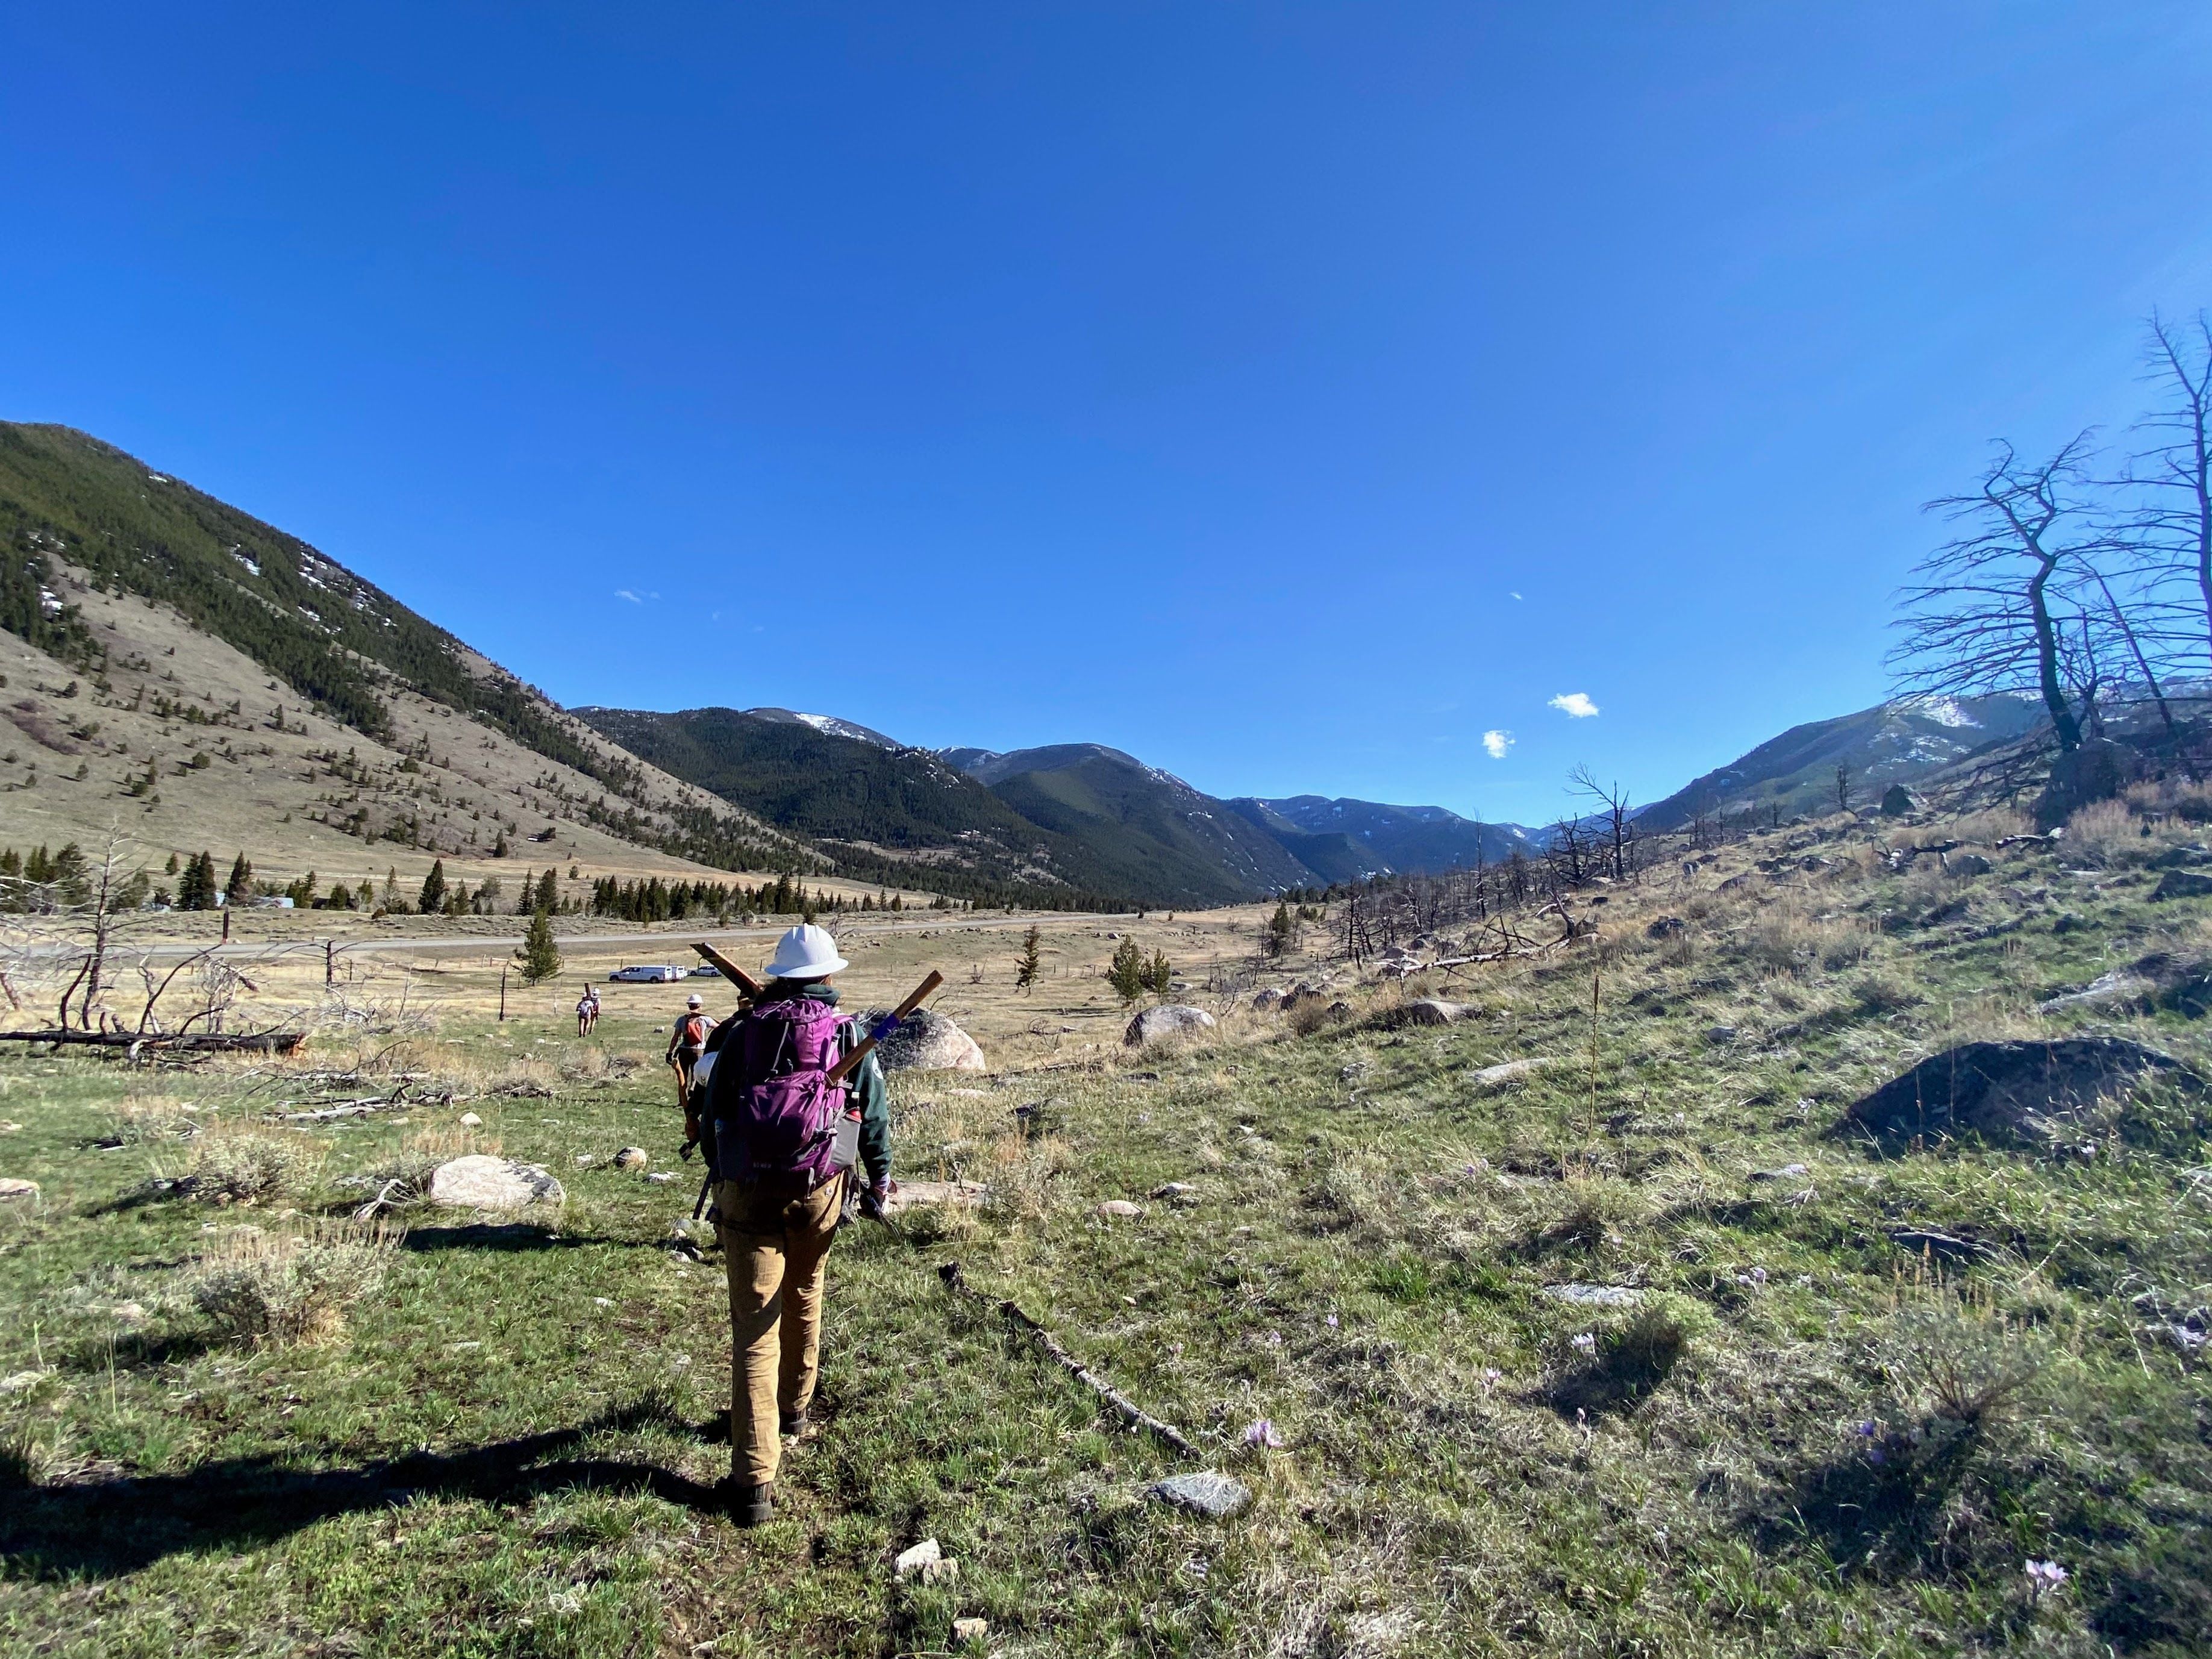 A crew leader wearing a backpack, with their back to the camera, walks into a field where other crew leaders are distantly waiting. The sky is bright blue and it's a sunny day.